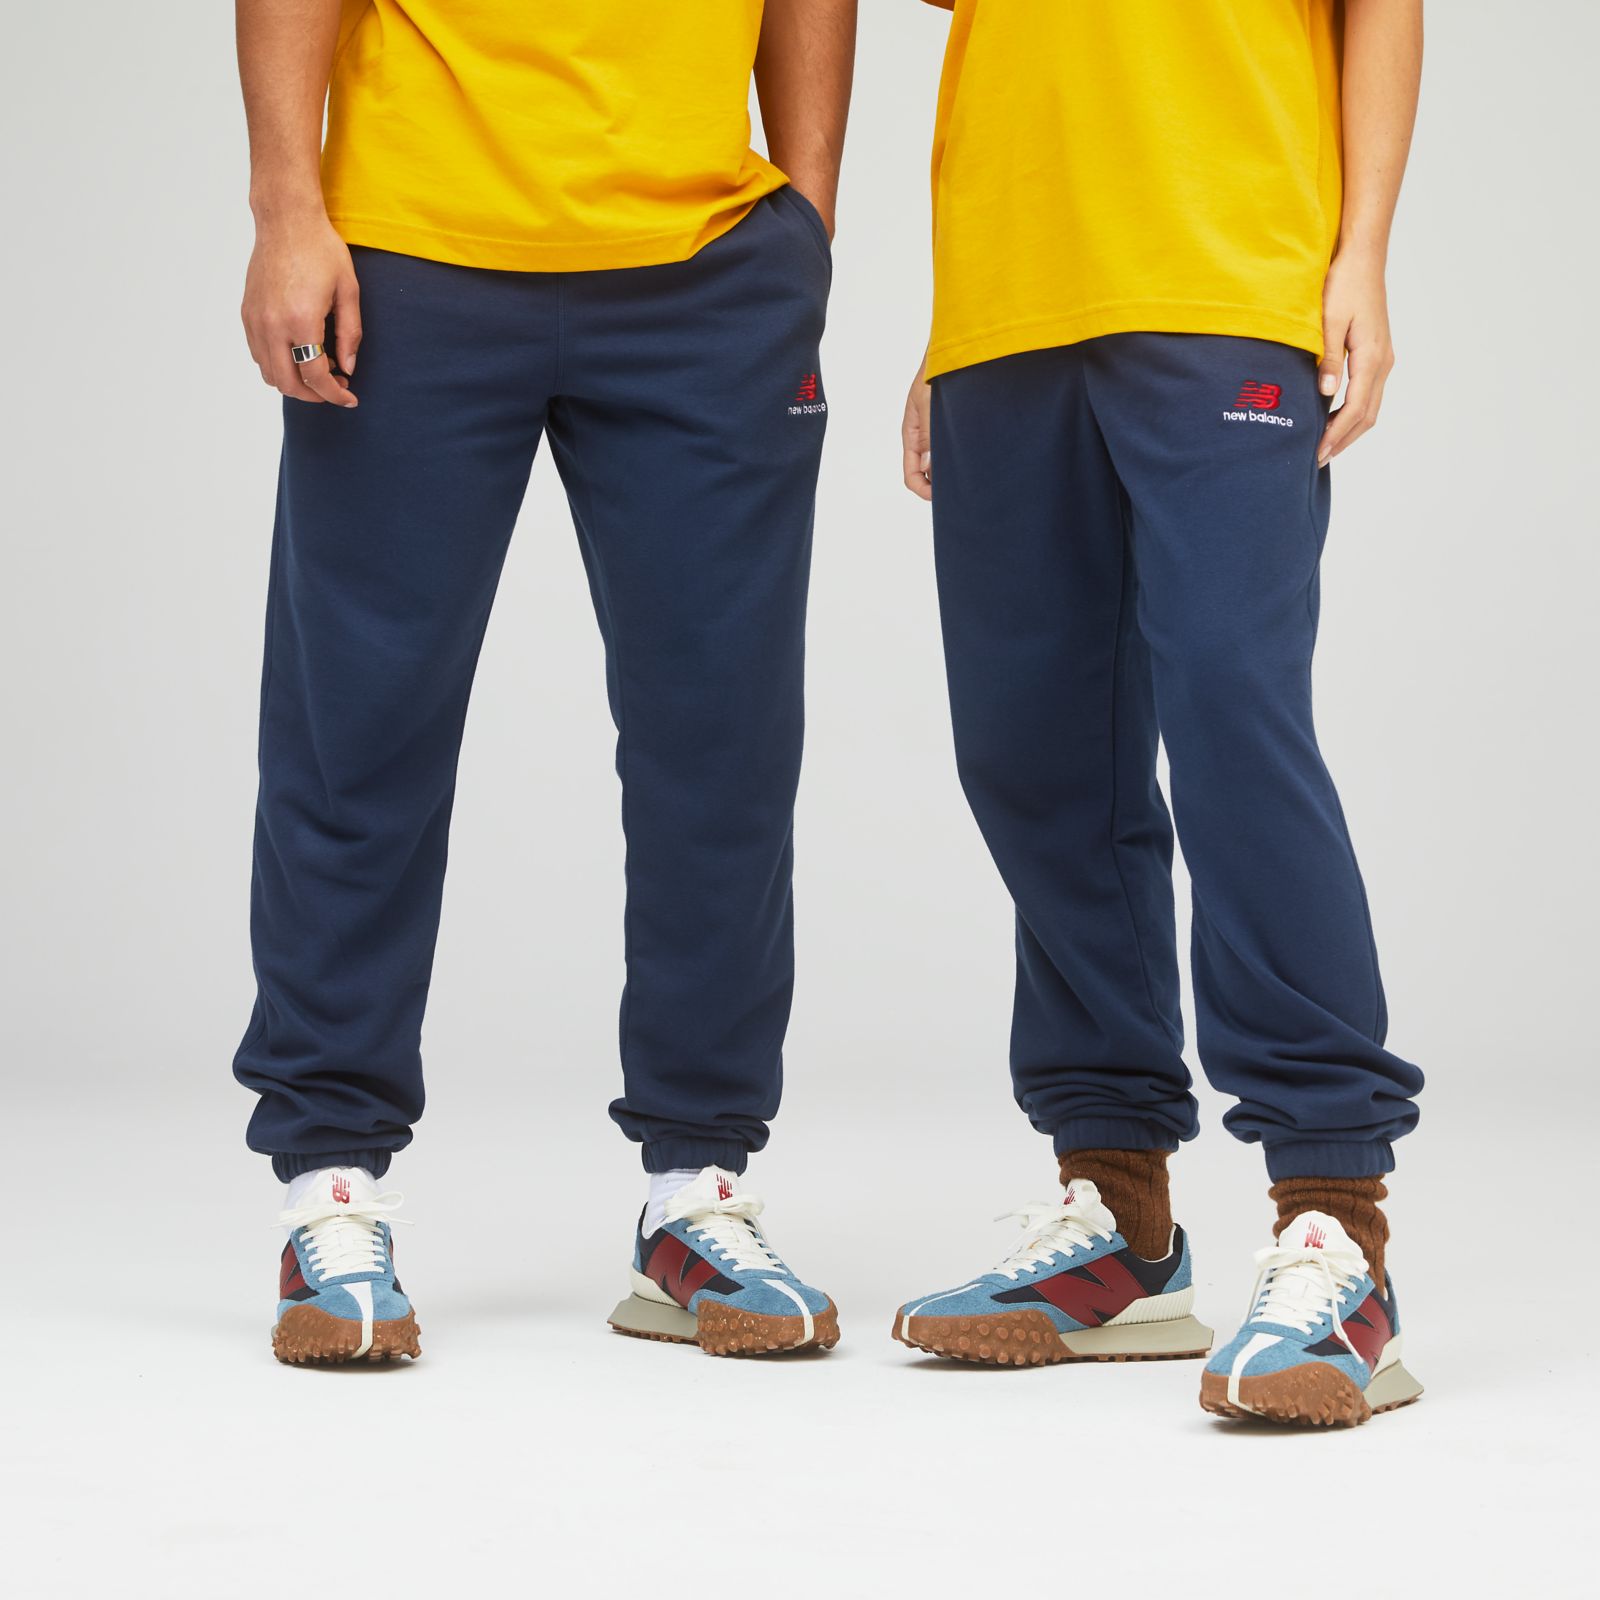 Uni-ssentials French Terry Sweatpant - New Balance